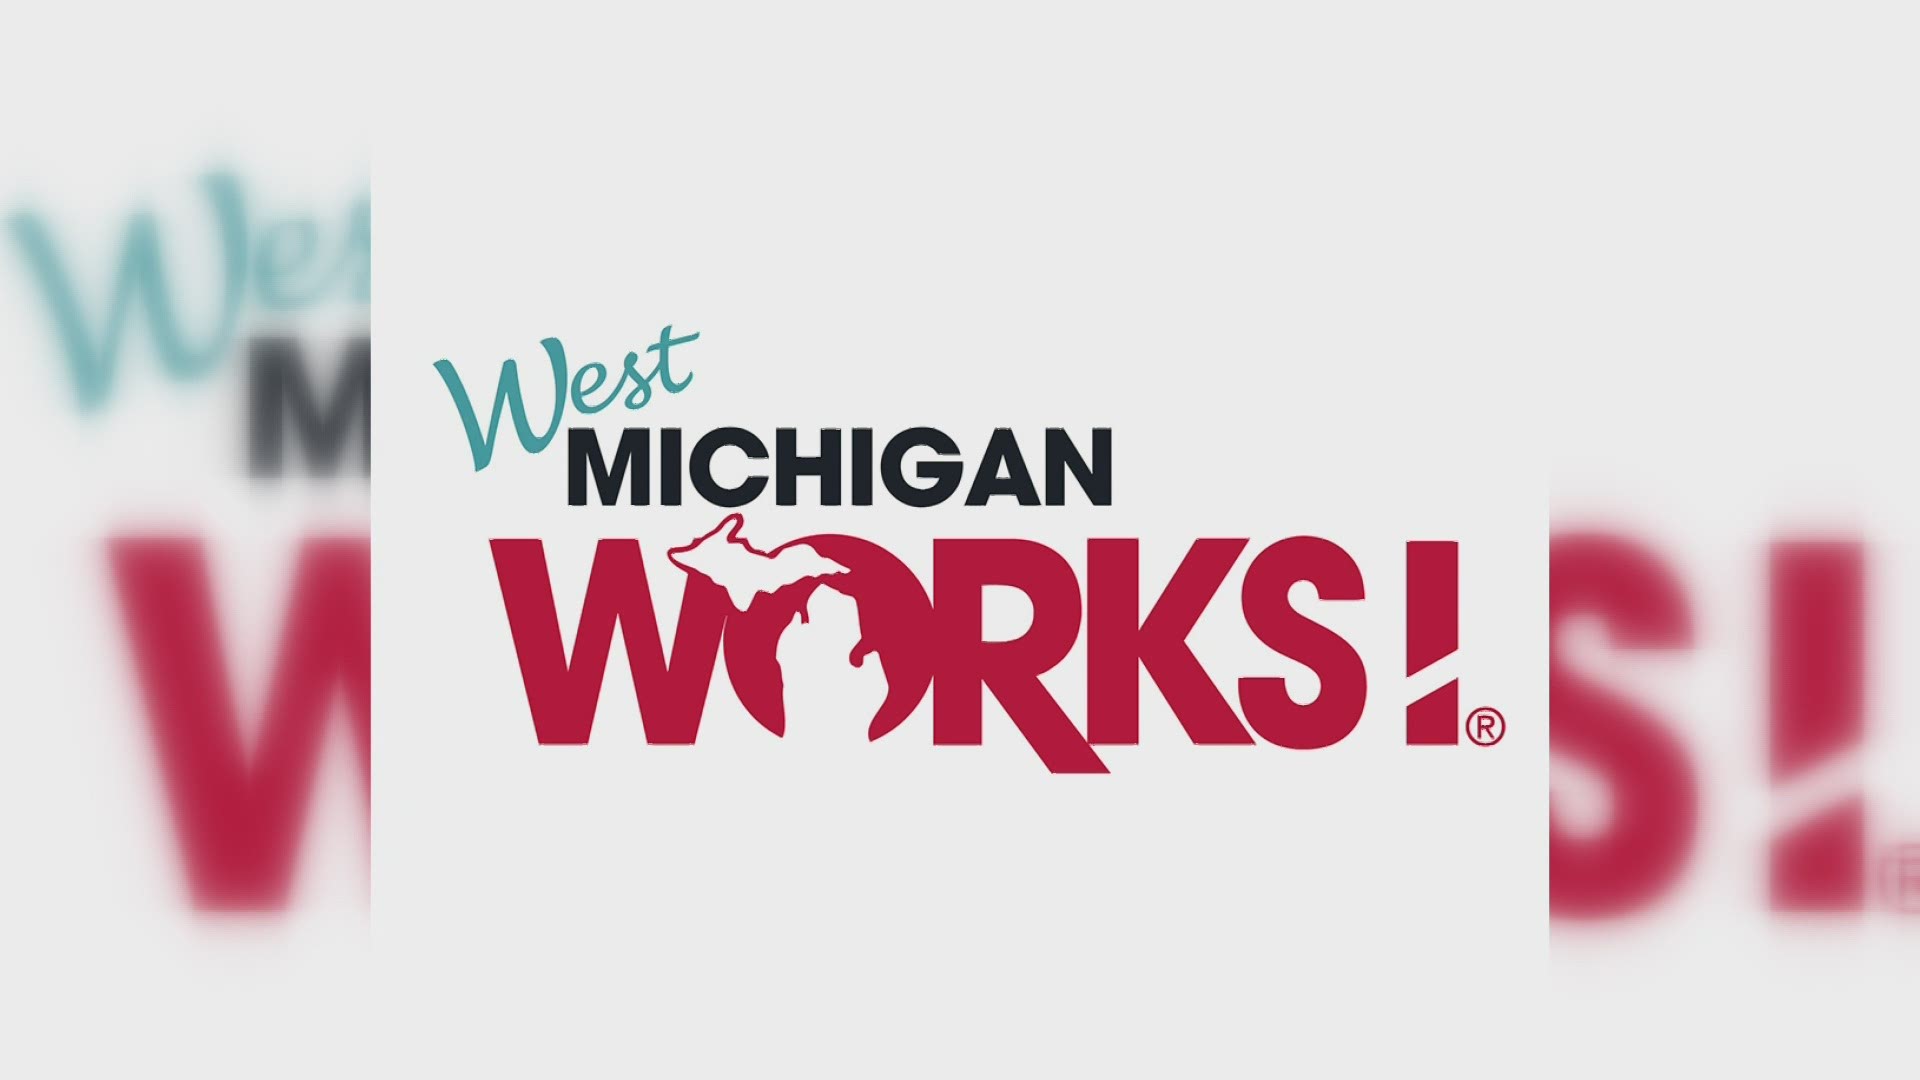 West Michigan Works! has teamed up with the West Michigan Health Careers Council to make people aware of the opportunities in health care